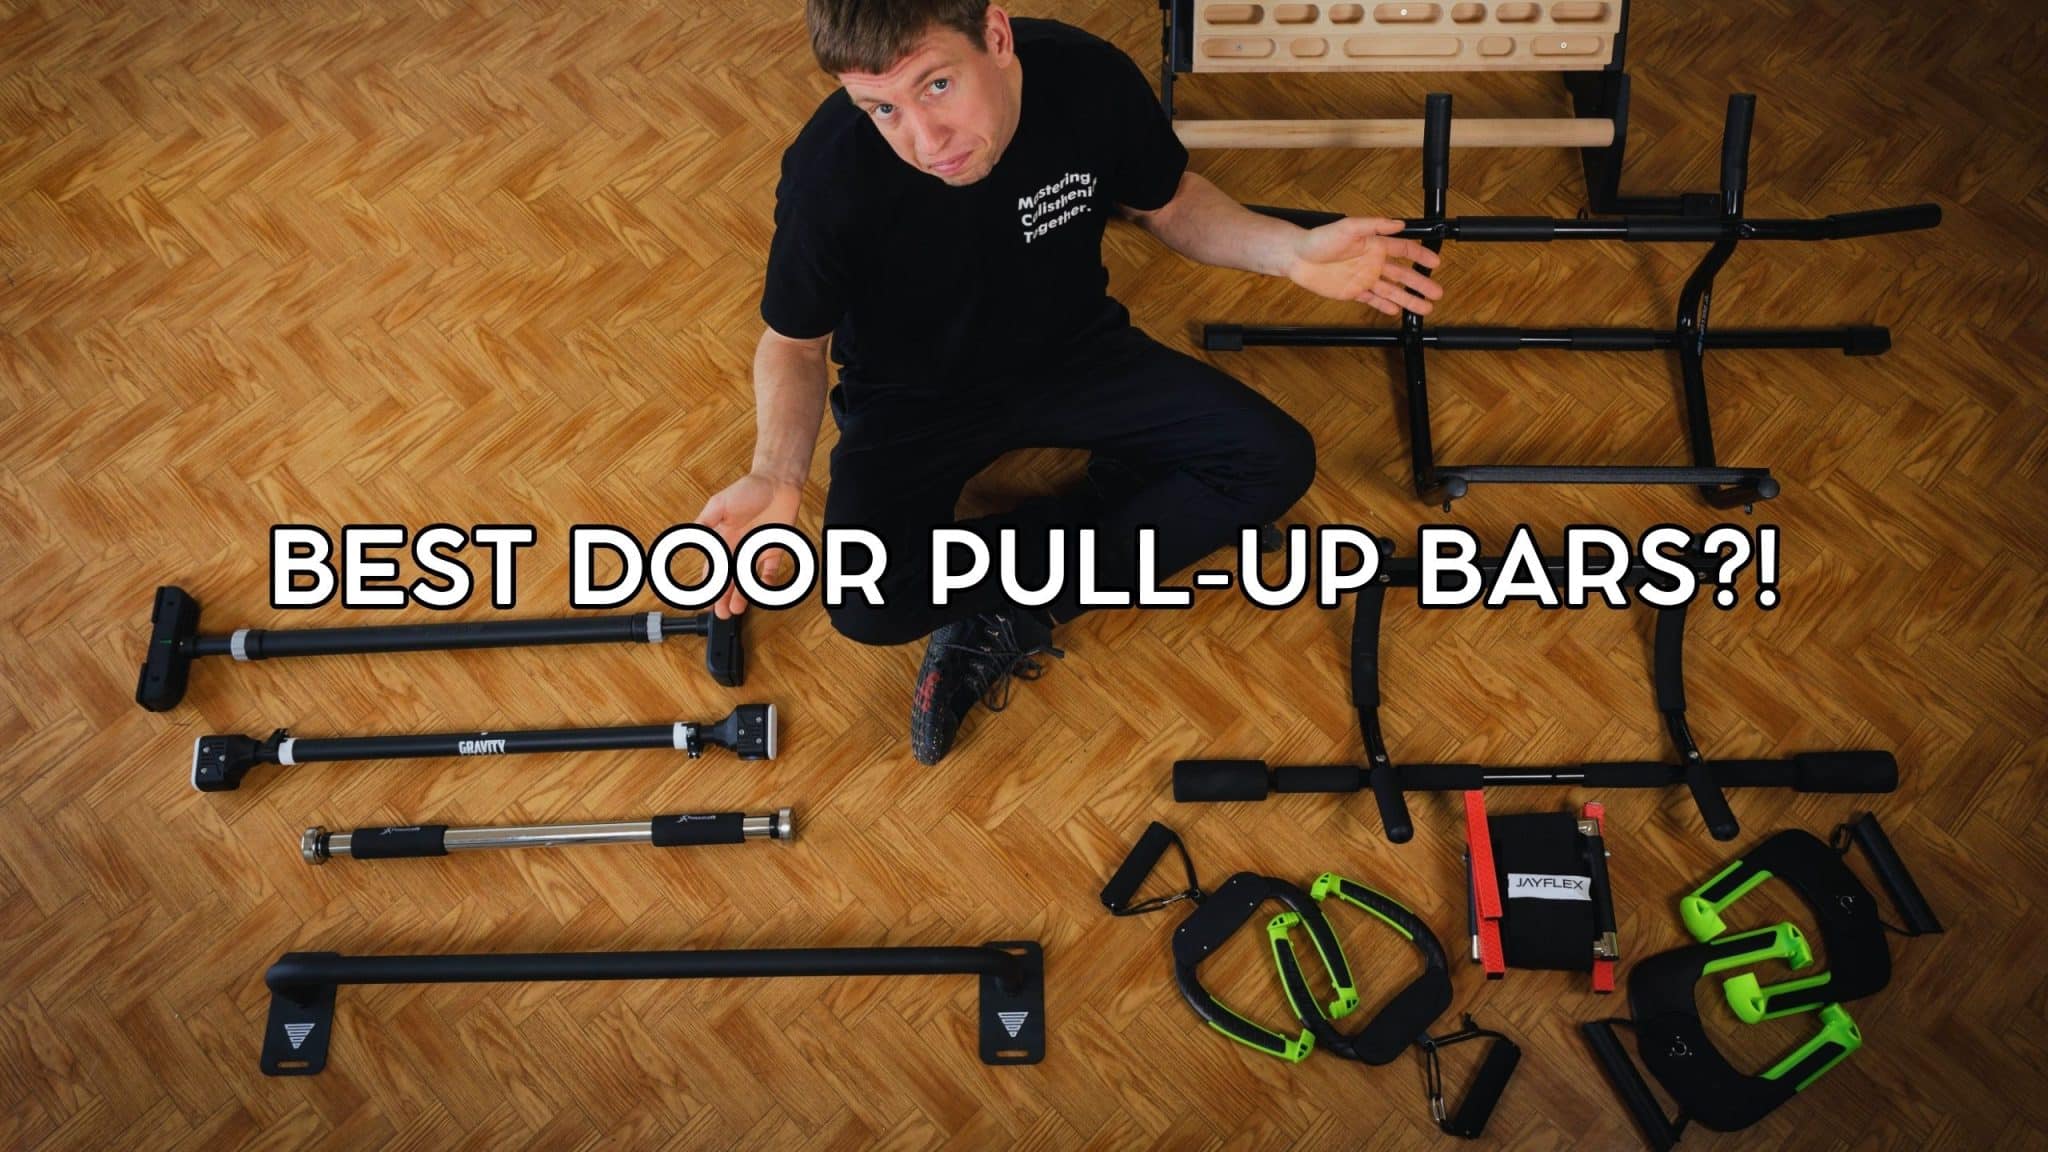 Jelle With The 10 Best Door Pull-Up Bars